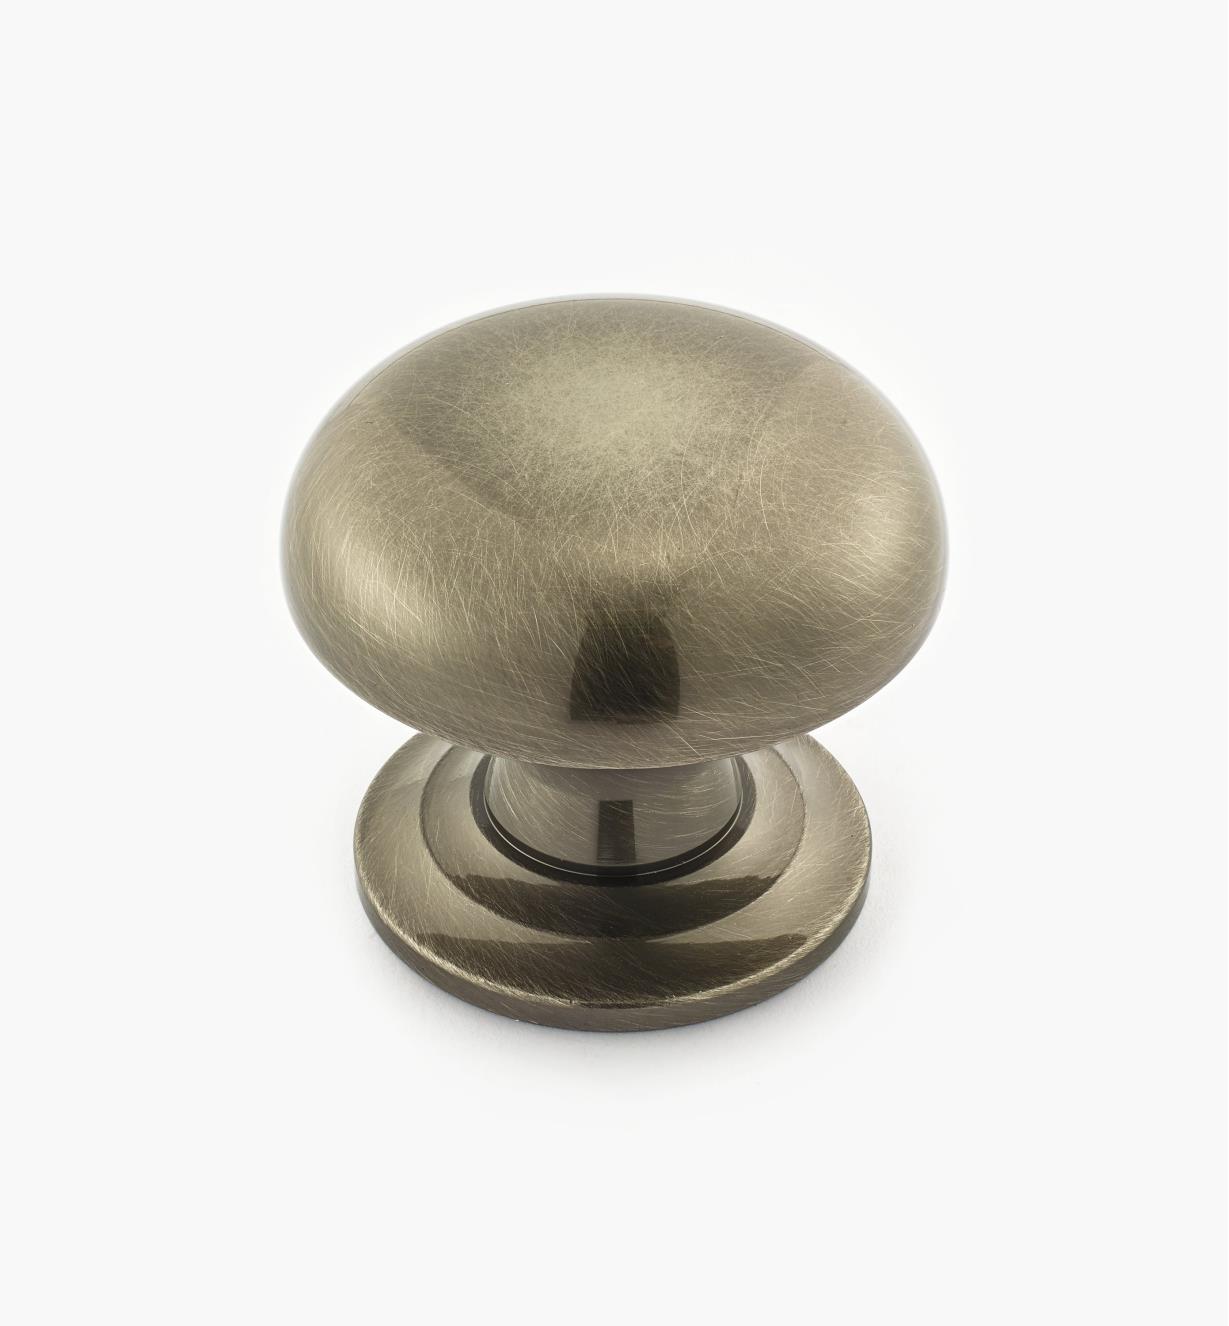 02W3309 - Antique Nickel Suite - 1 1/2" x 1 1/4" Turned Brass Dome Knob